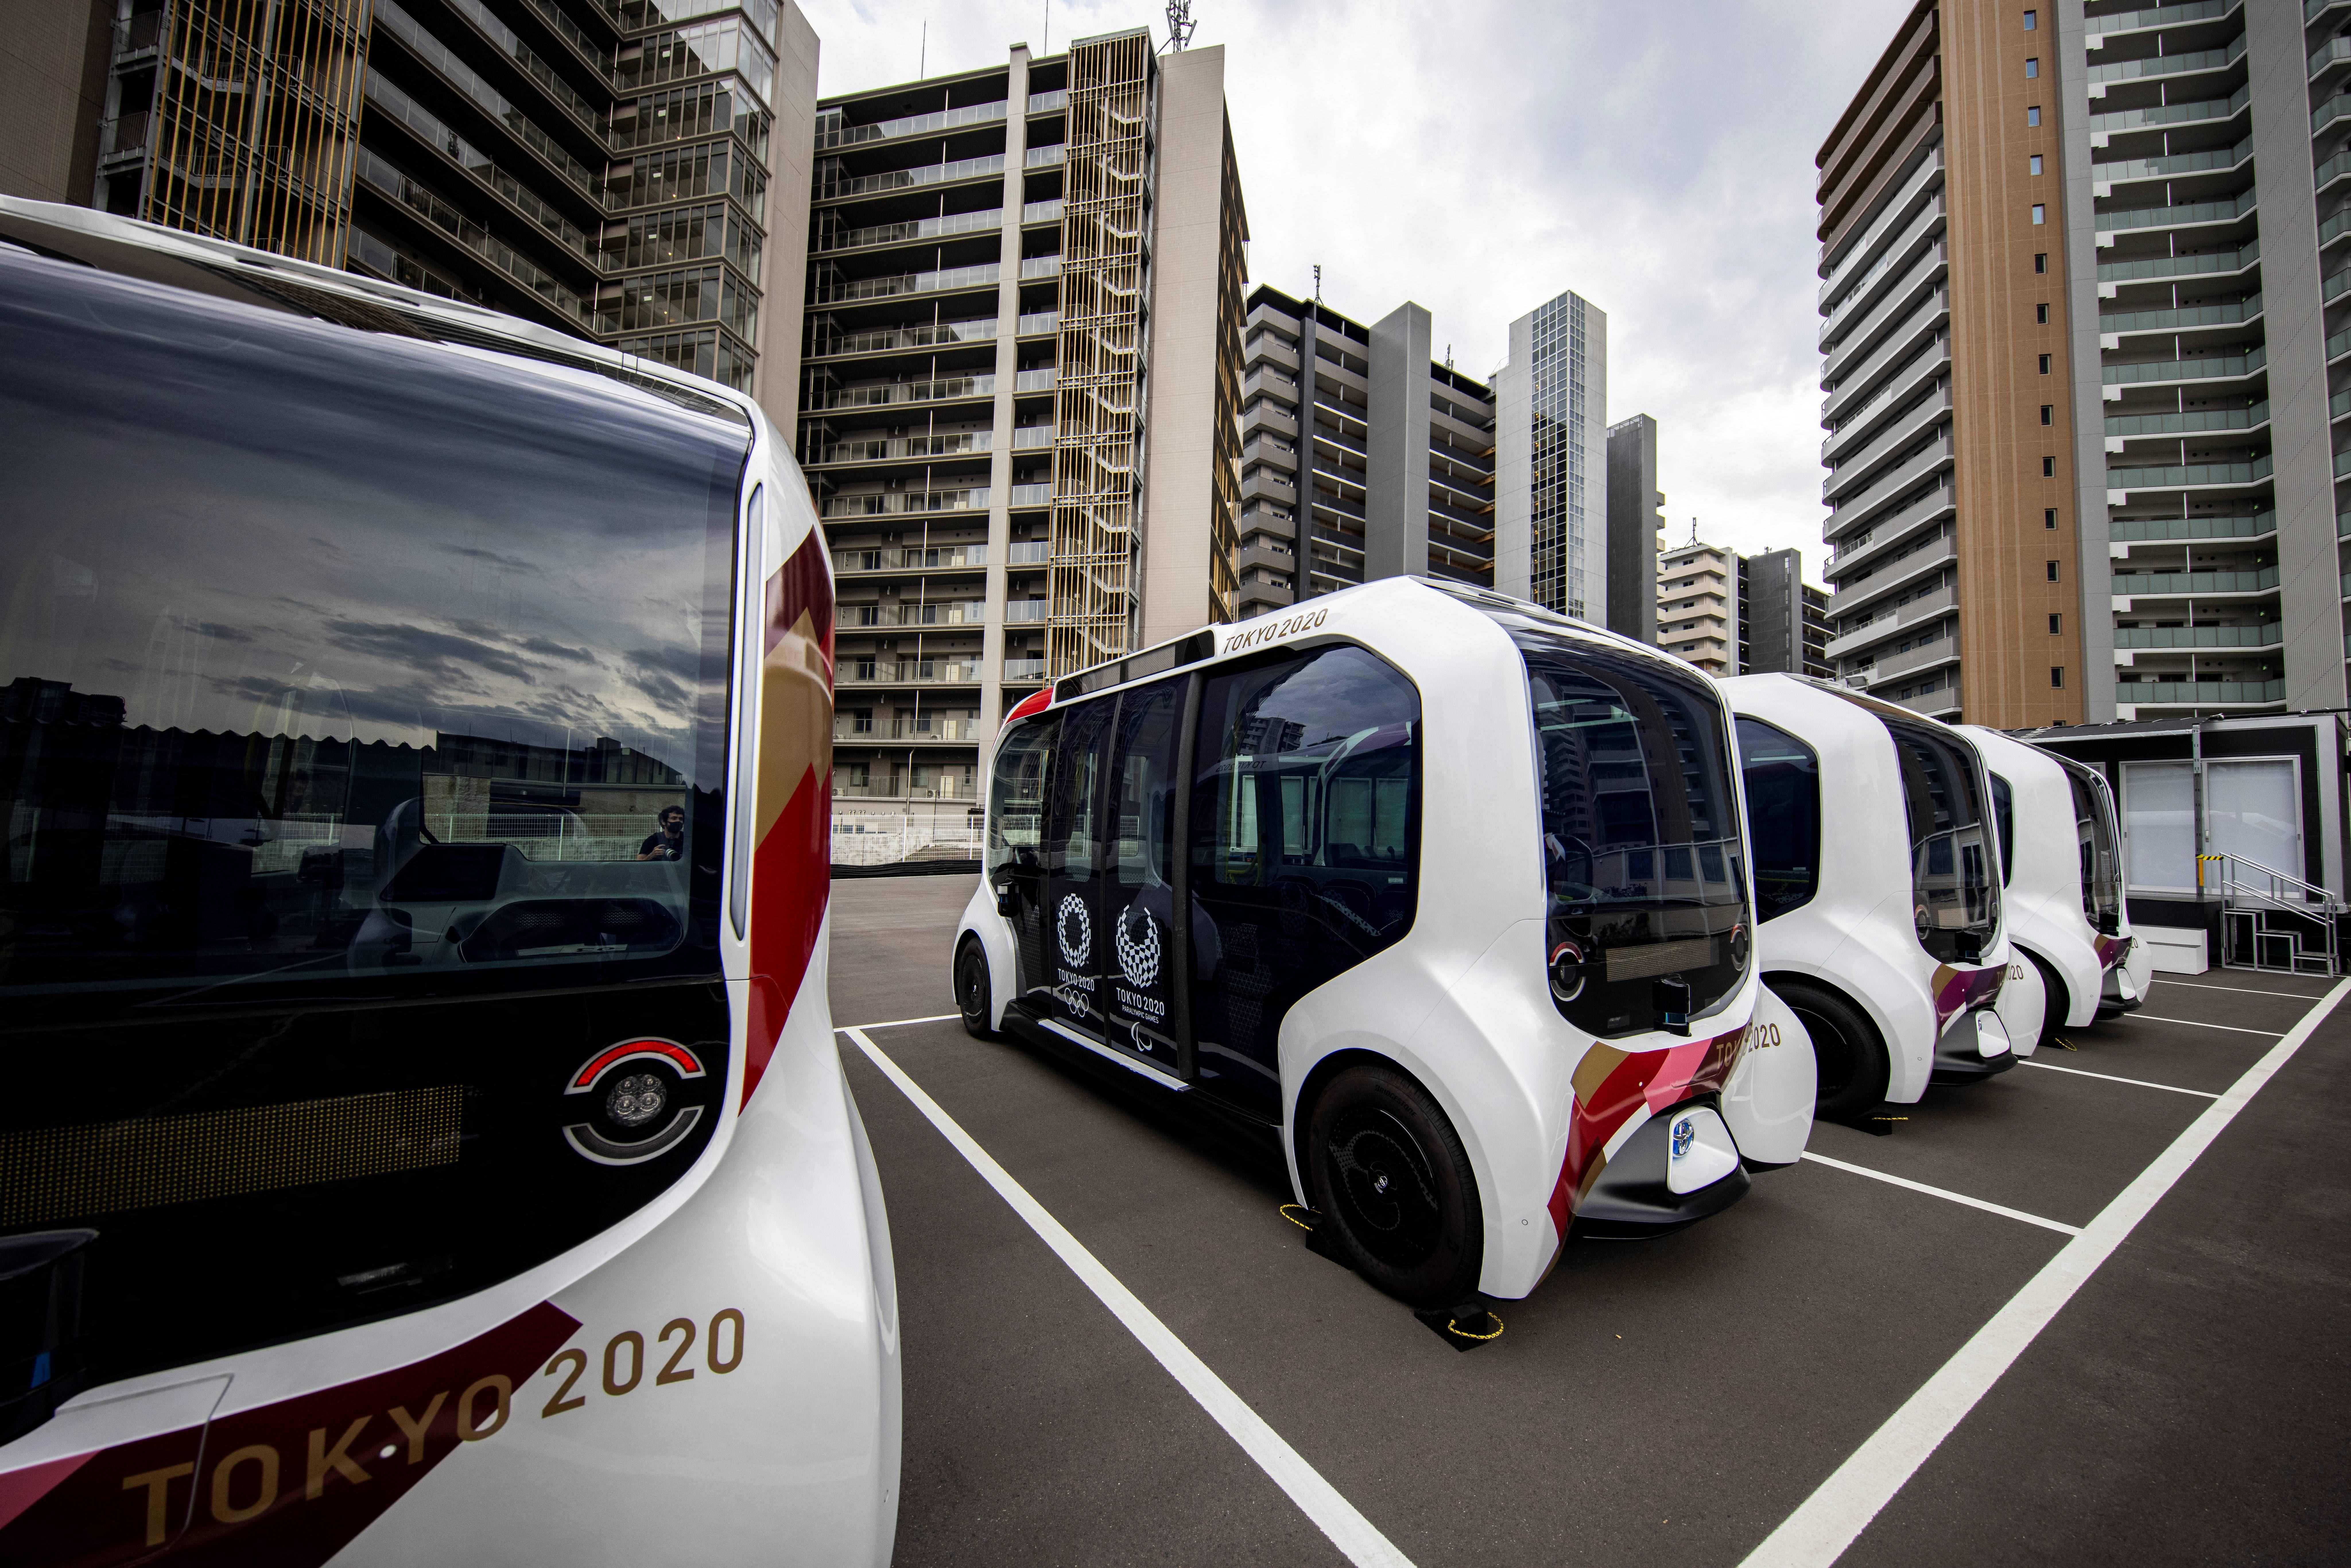 The self-driving vehicles that will be used to shuttle athletes.